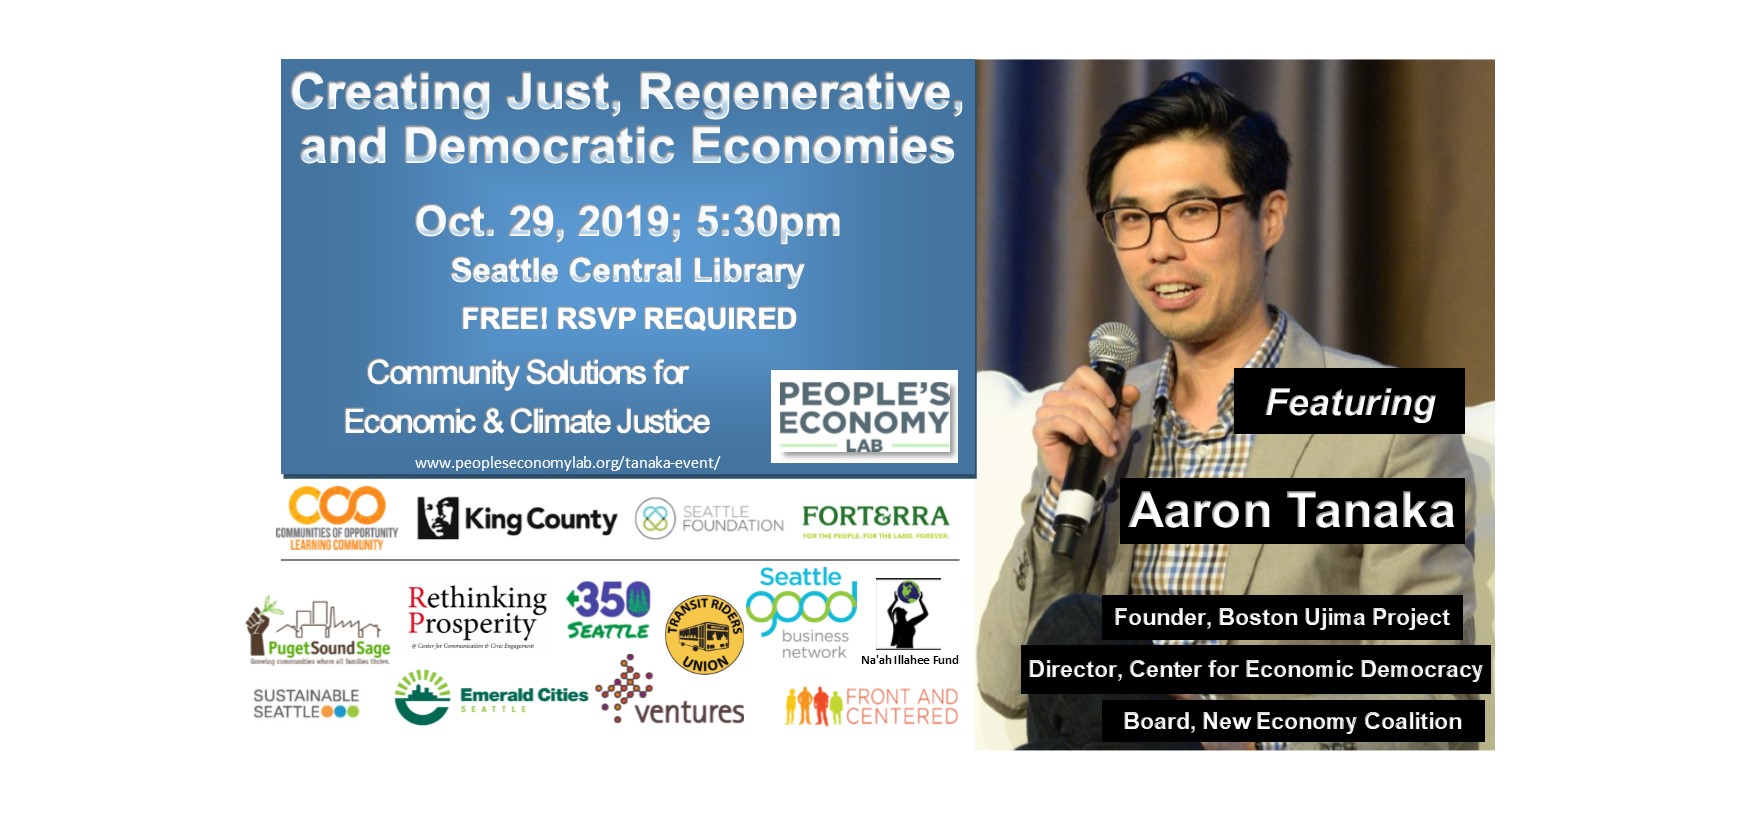 You are currently viewing Creating Just, Regenerative, and Democratic Economies with Aaron Tanaka & Local Leaders